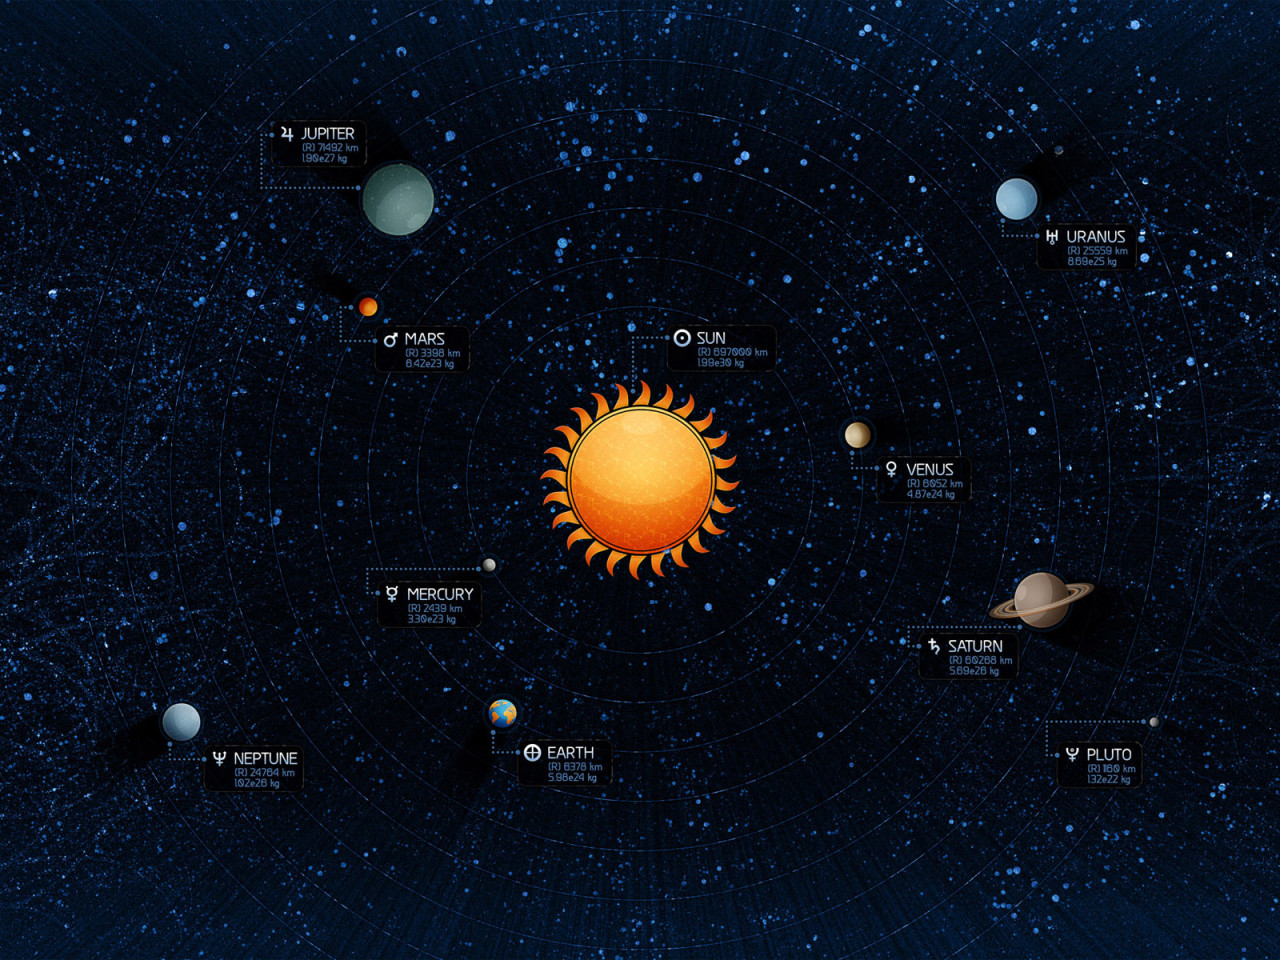 Previous, Space - Solar System wallpaper